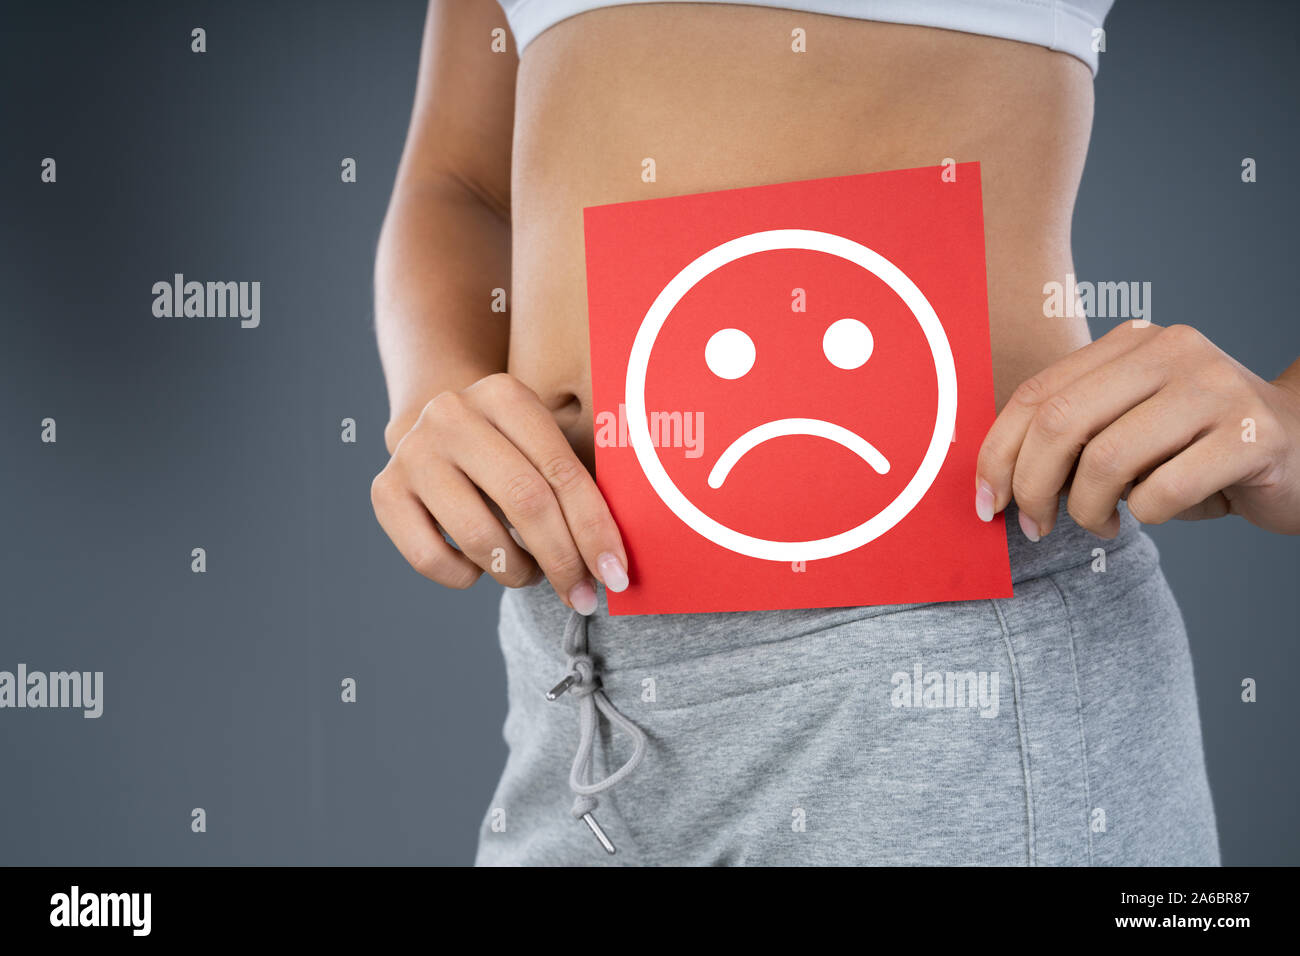 Woman With Stomach Pain Showing Sad Sign On Red Piece Of Paper Stock Photo